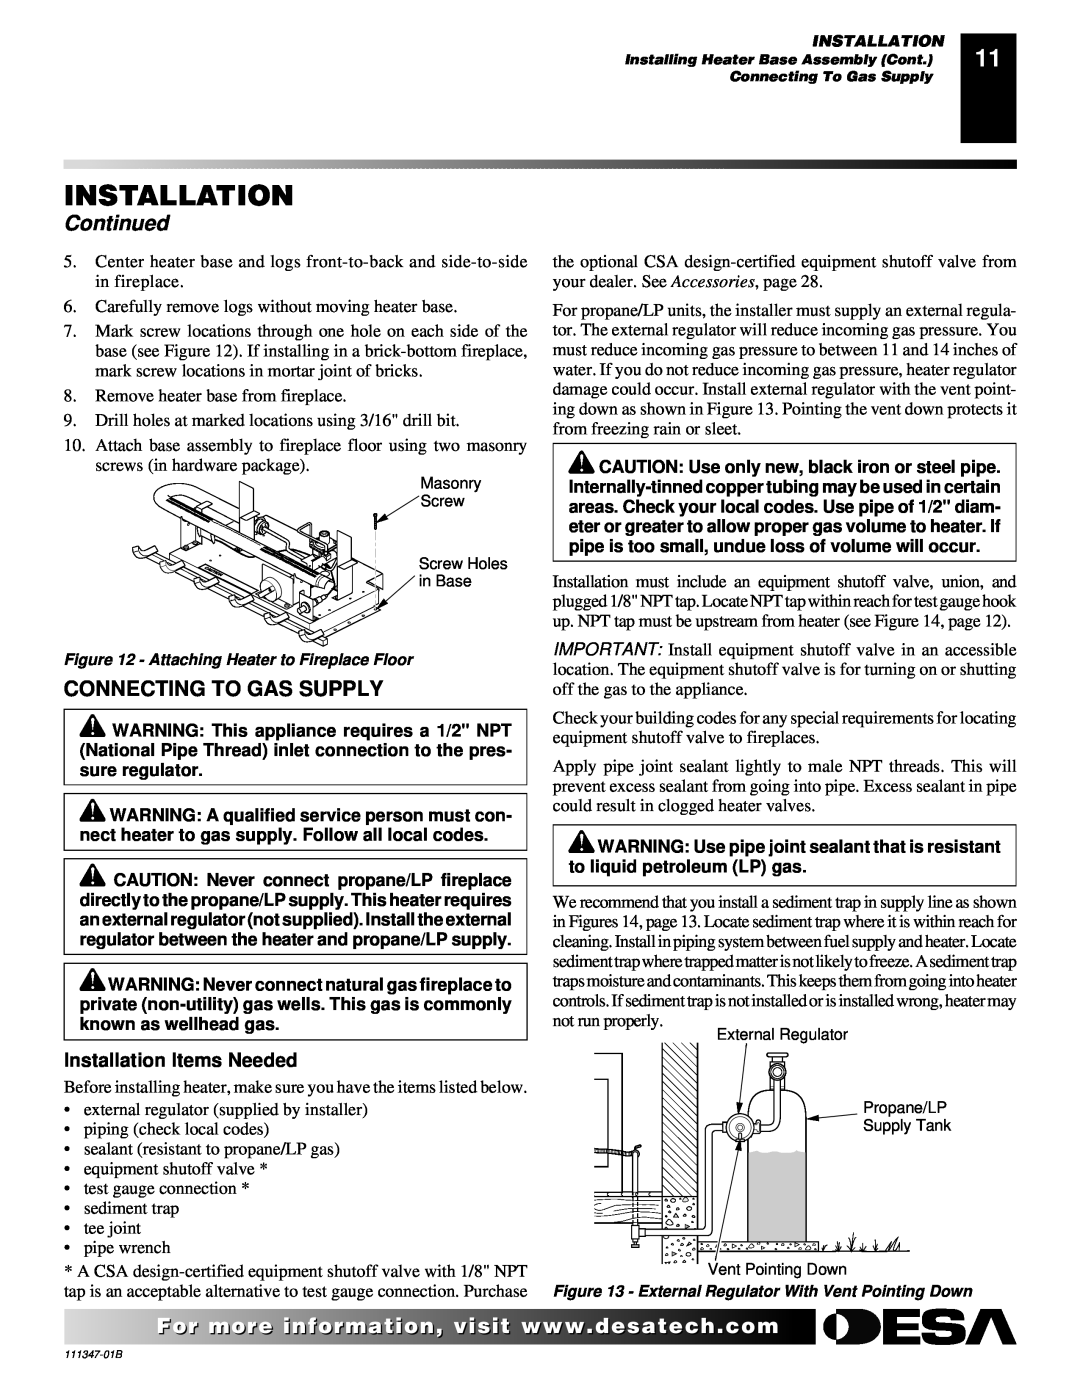 Desa LSL3124N installation manual Connecting To Gas Supply, Continued, Installation Items Needed 